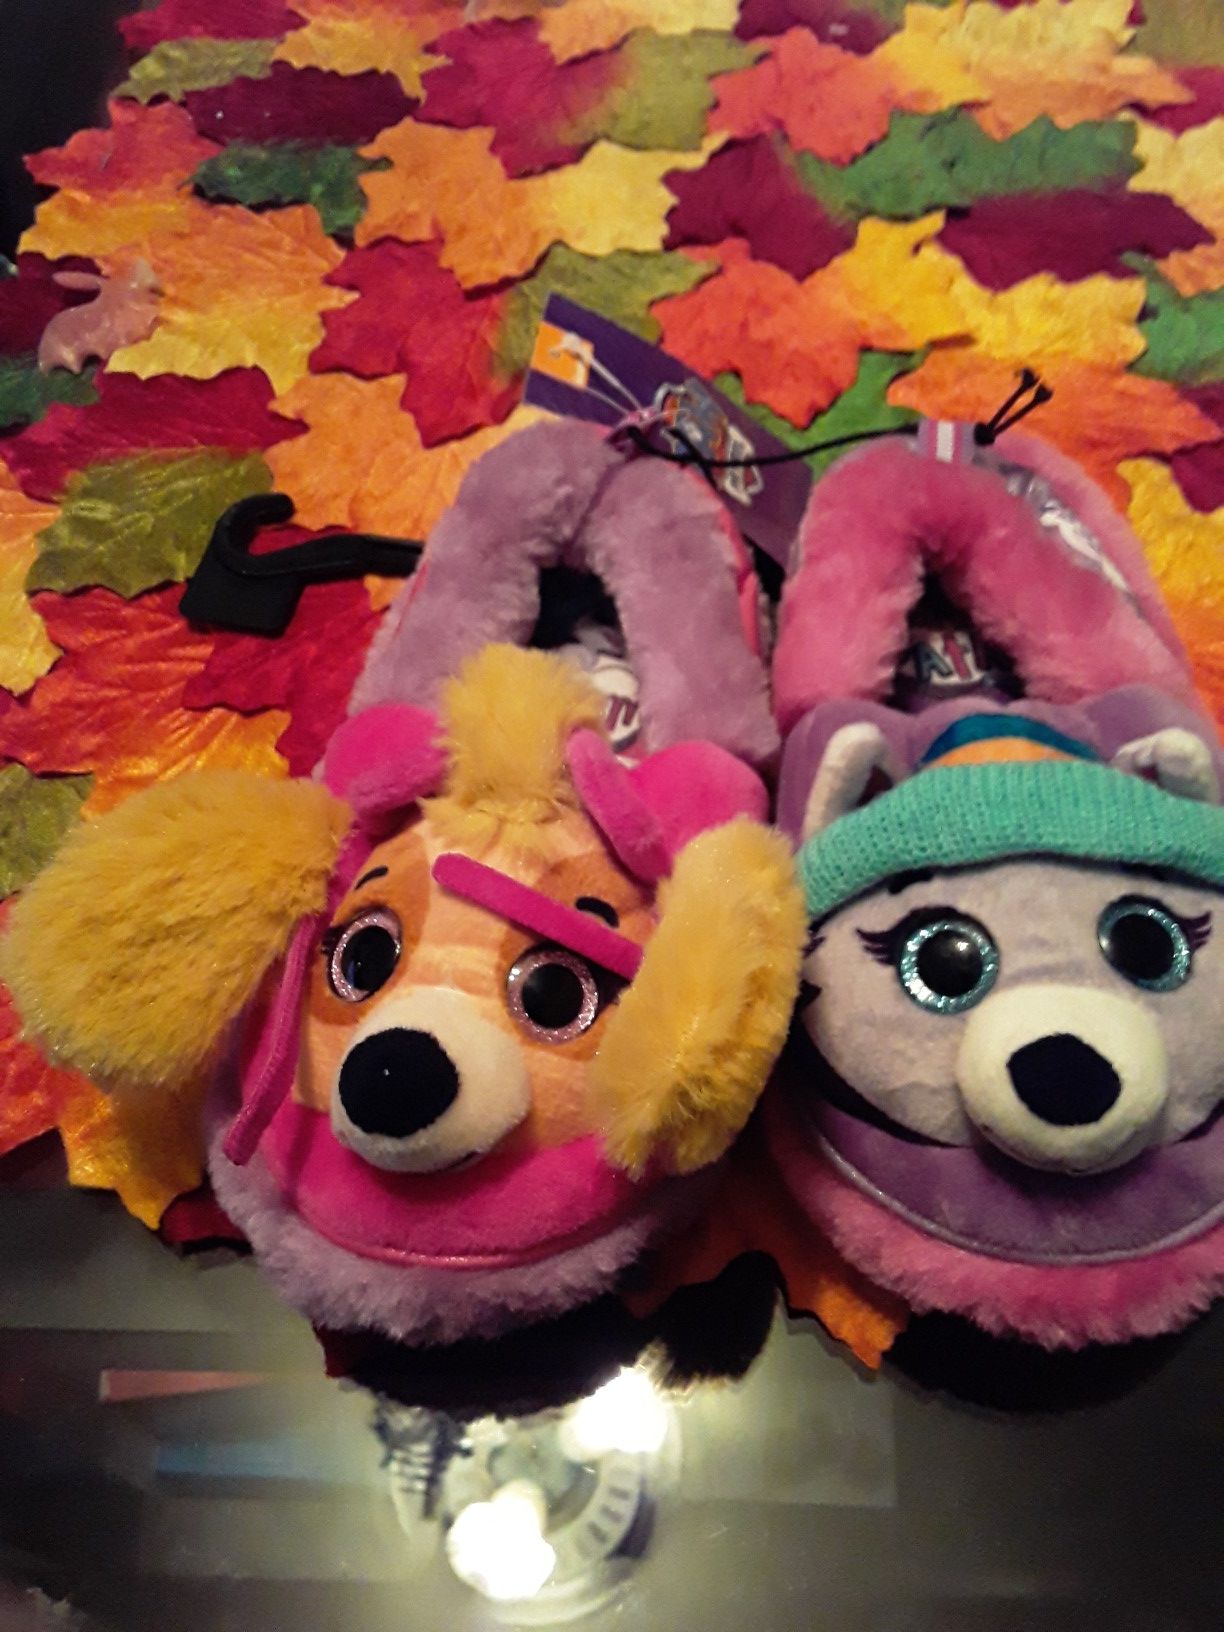 New Paw patrol, cars and Trolls houseshoes